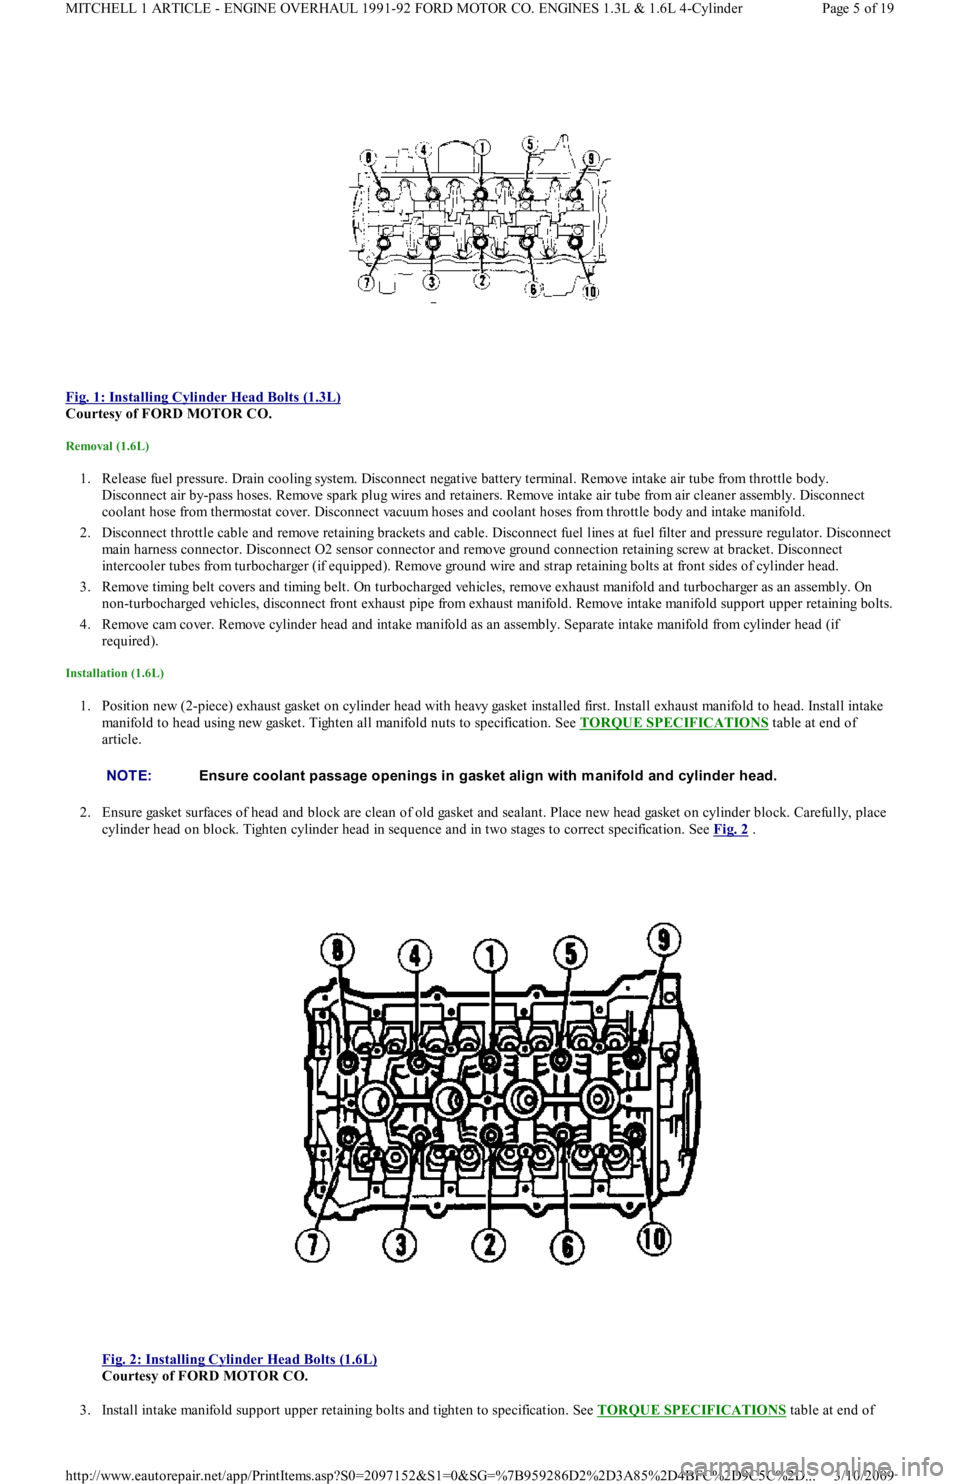 FORD FESTIVA 1991  Service Manual  
Fig. 1: Installing Cylinder Head Bolts (1.3L)
 
Courtesy of FORD MOTOR CO. 
Removal (1.6L) 
1. Release fuel pressure. Drain cooling system. Disconnect negative battery terminal. Remove intake air tu